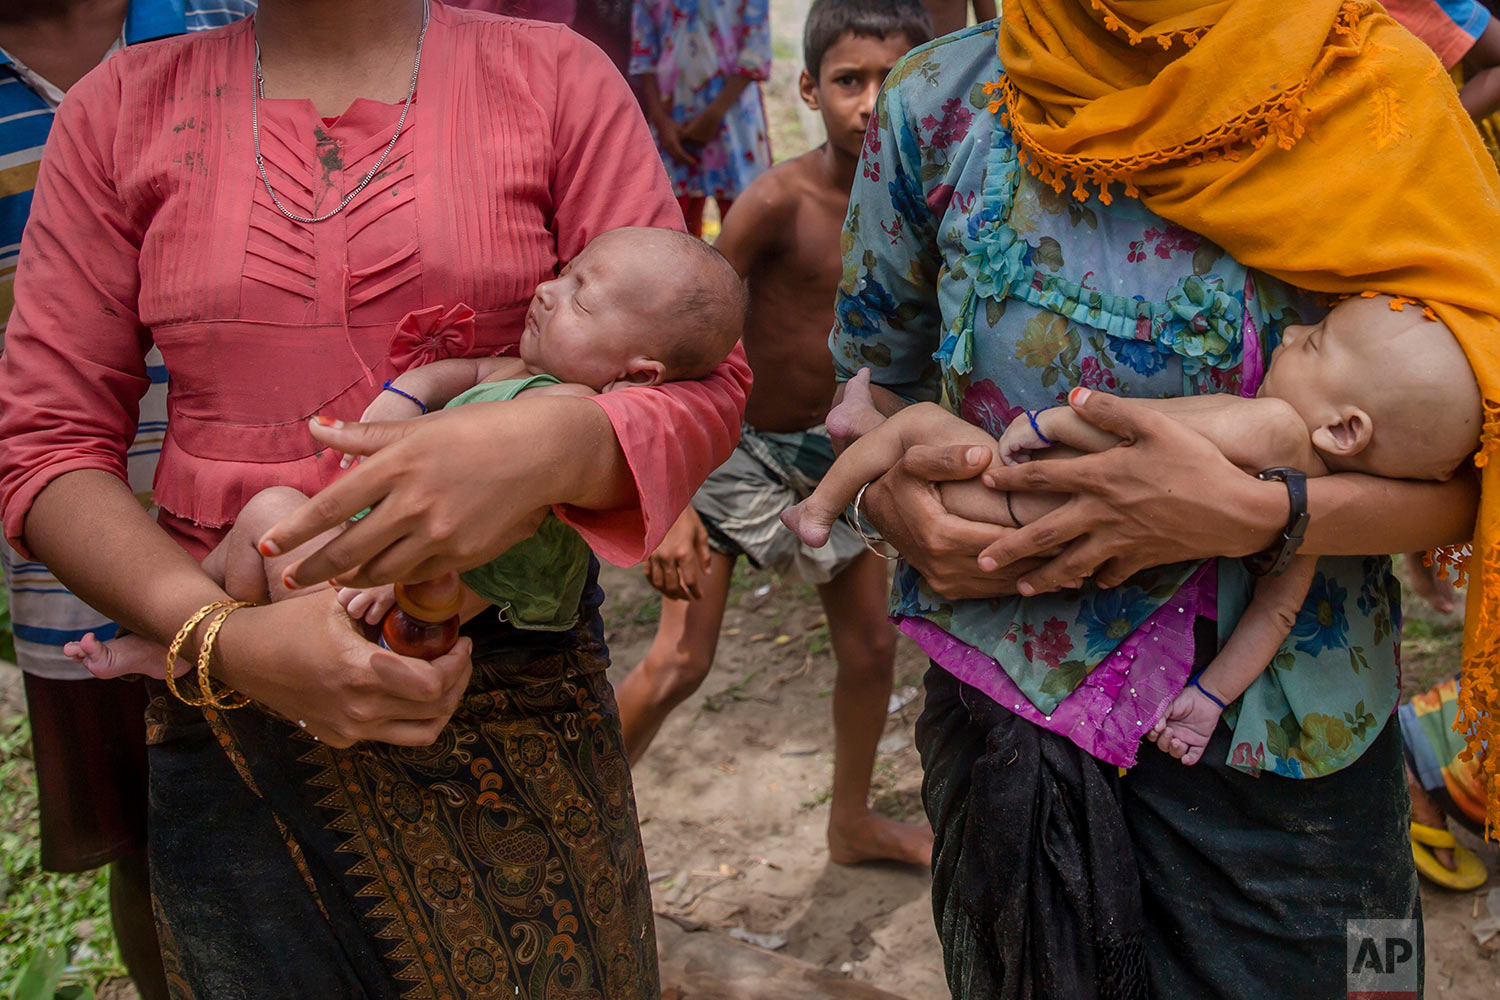  A Rohingya Muslim woman Hanida Begum, right, who crossed over from Myanmar into Bangladesh, holds her infant son Abdul Masood who died when the boat they were traveling in capsized minutes before reaching shore, as a relative holds Masood's twin bro